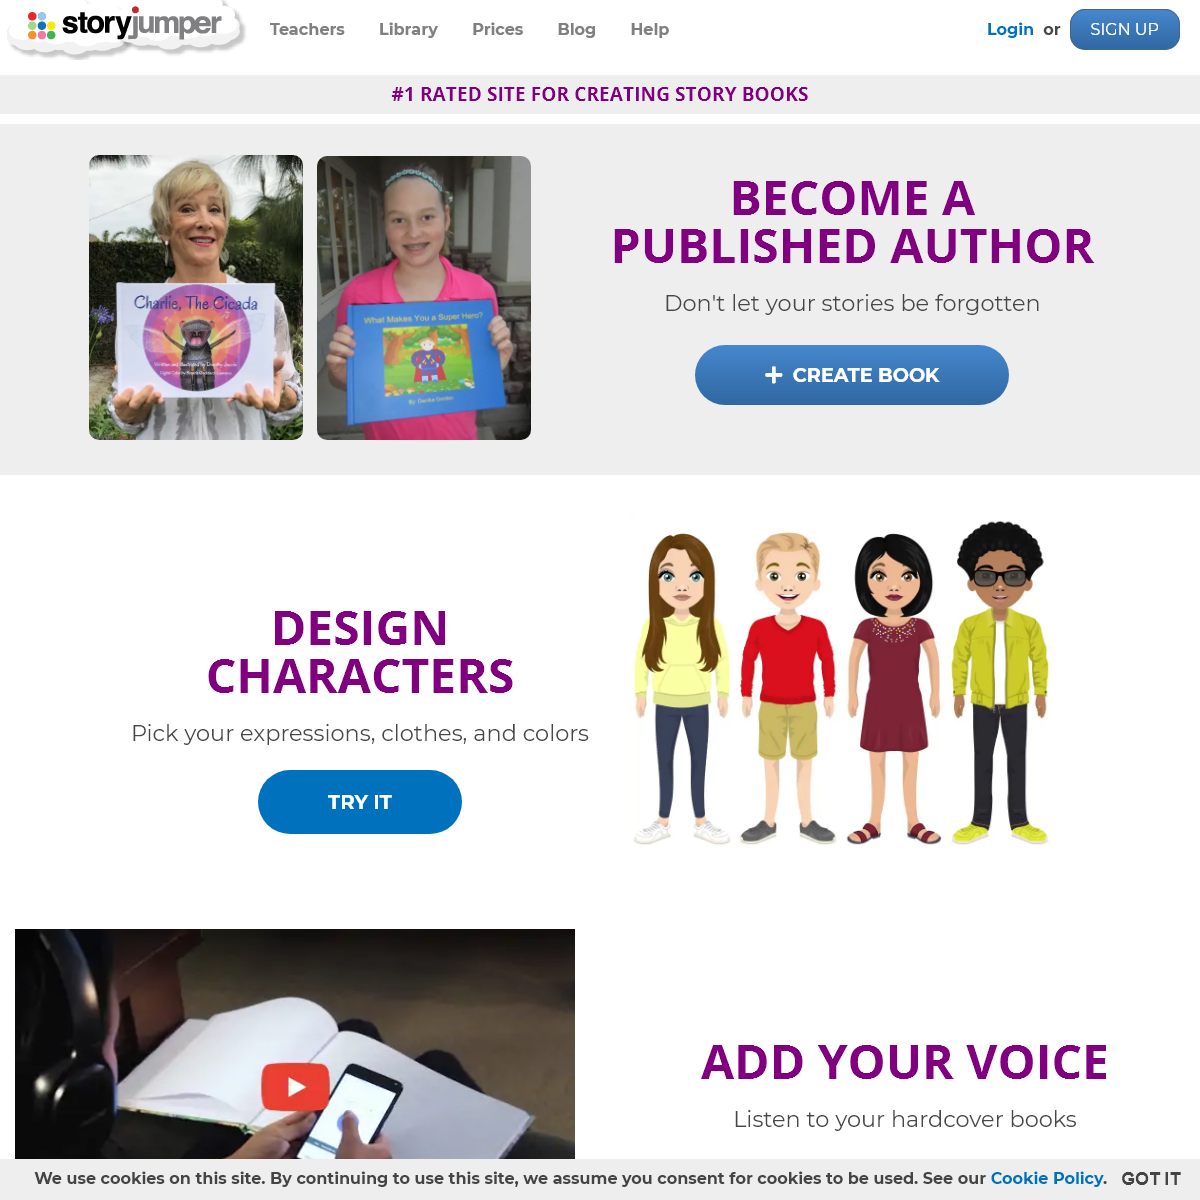 StoryJumper- #1 rated site for creating story books